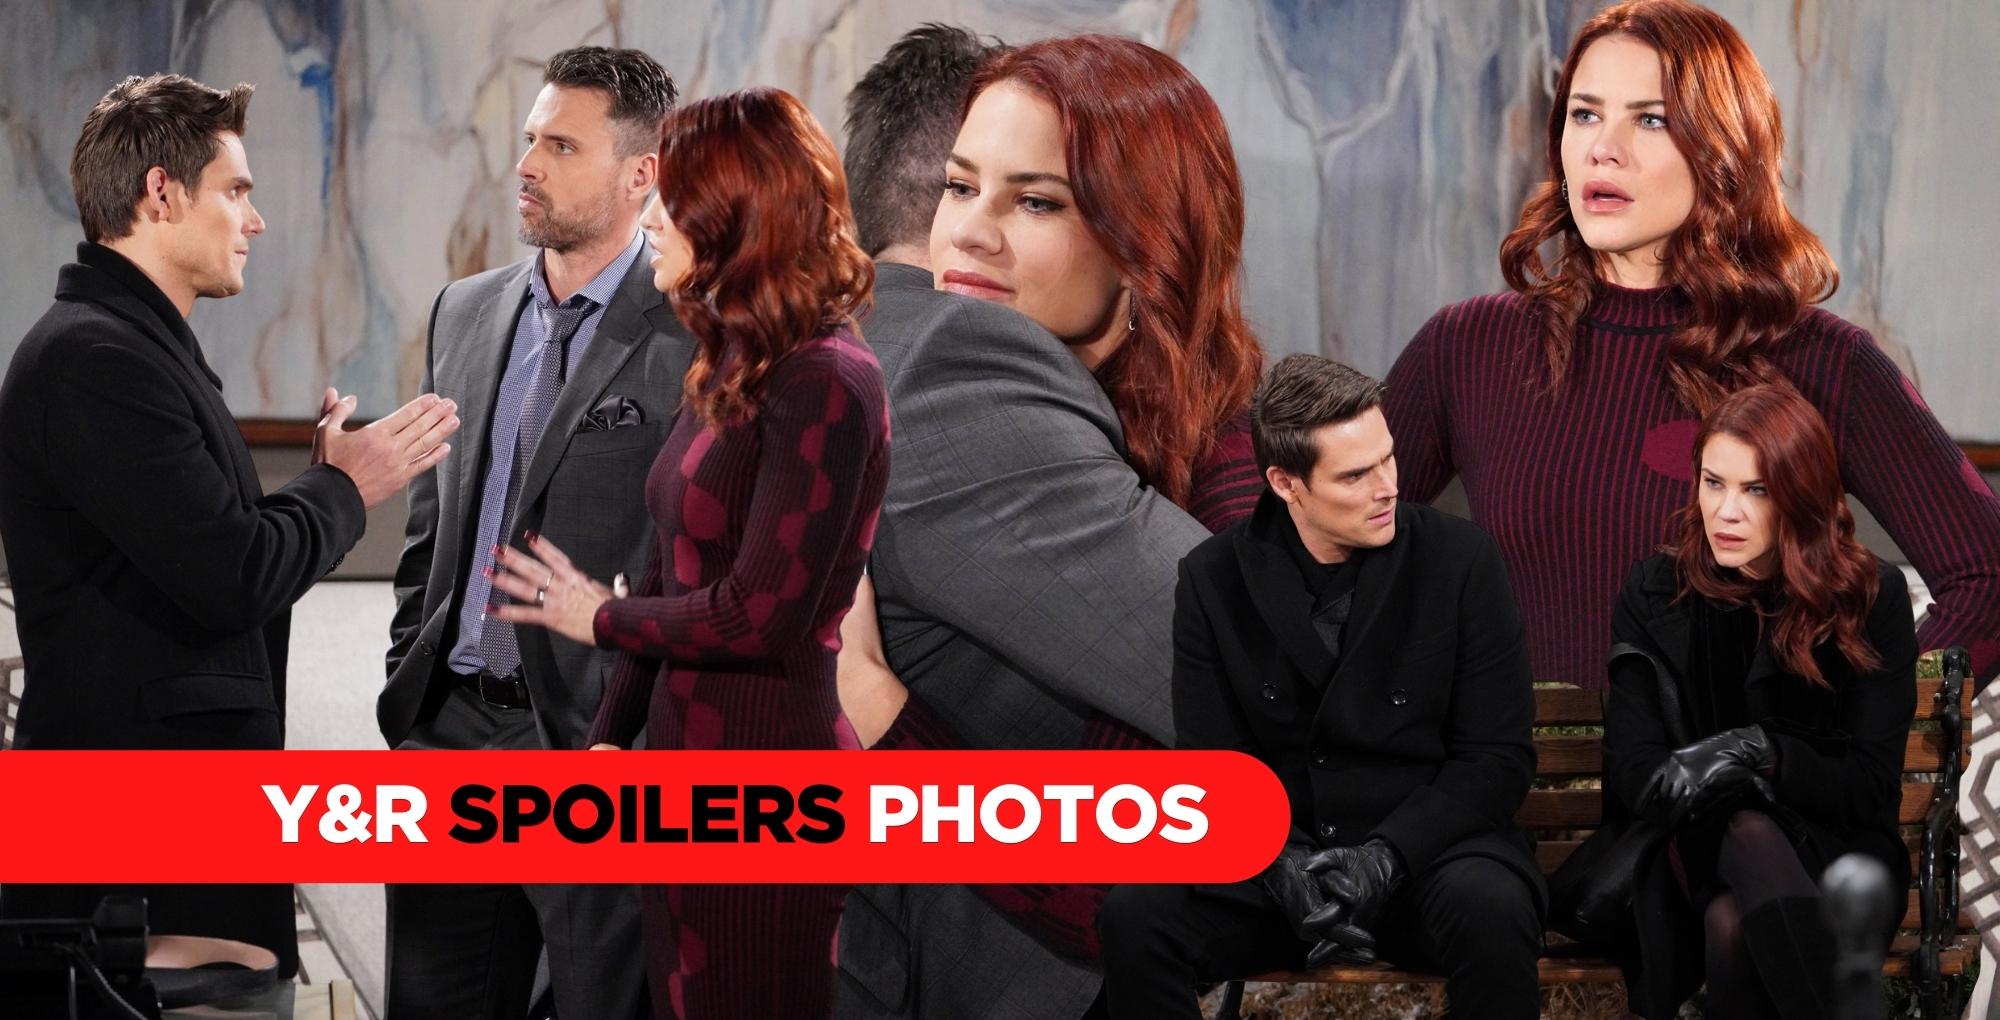 sally spectra, nick newman, and adam newman y&r spoilers photos